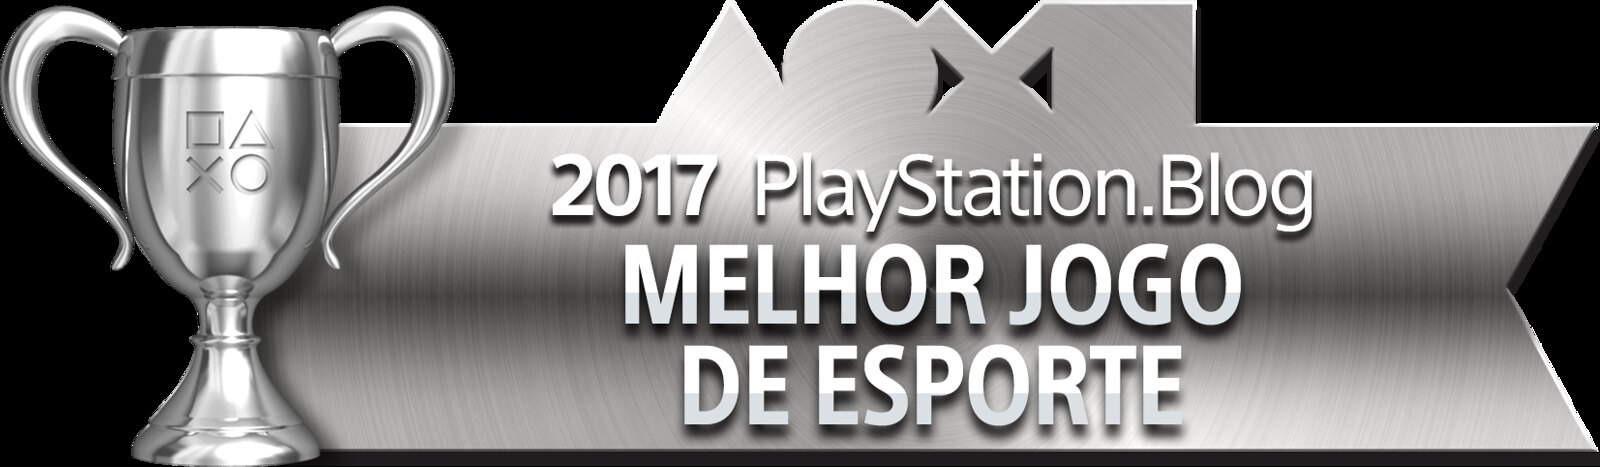 PlayStation Blog Game of the Year 2017 - Best Sports Game (Silver)